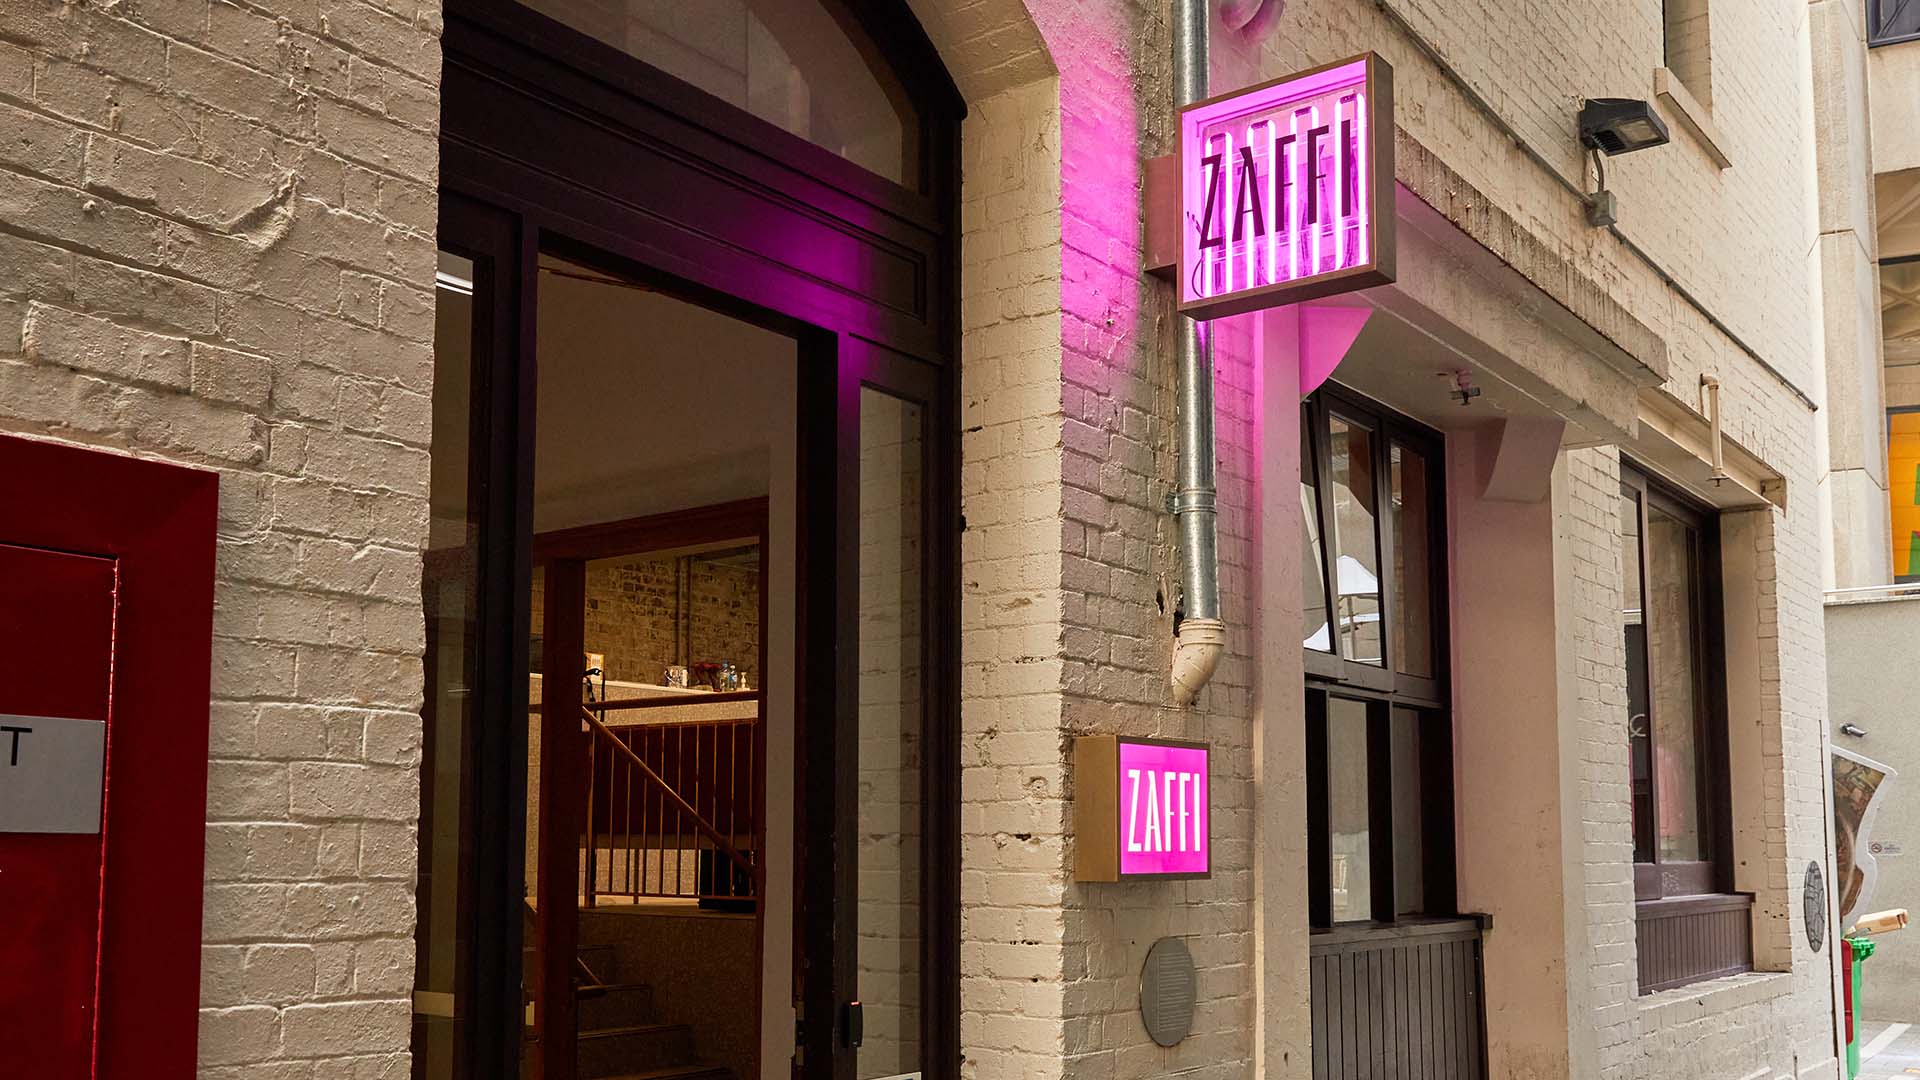 The CBD's New Neon-Lit Late-Night Restaurant and Bar Zaffi Keeps the Party Rolling Until 4am